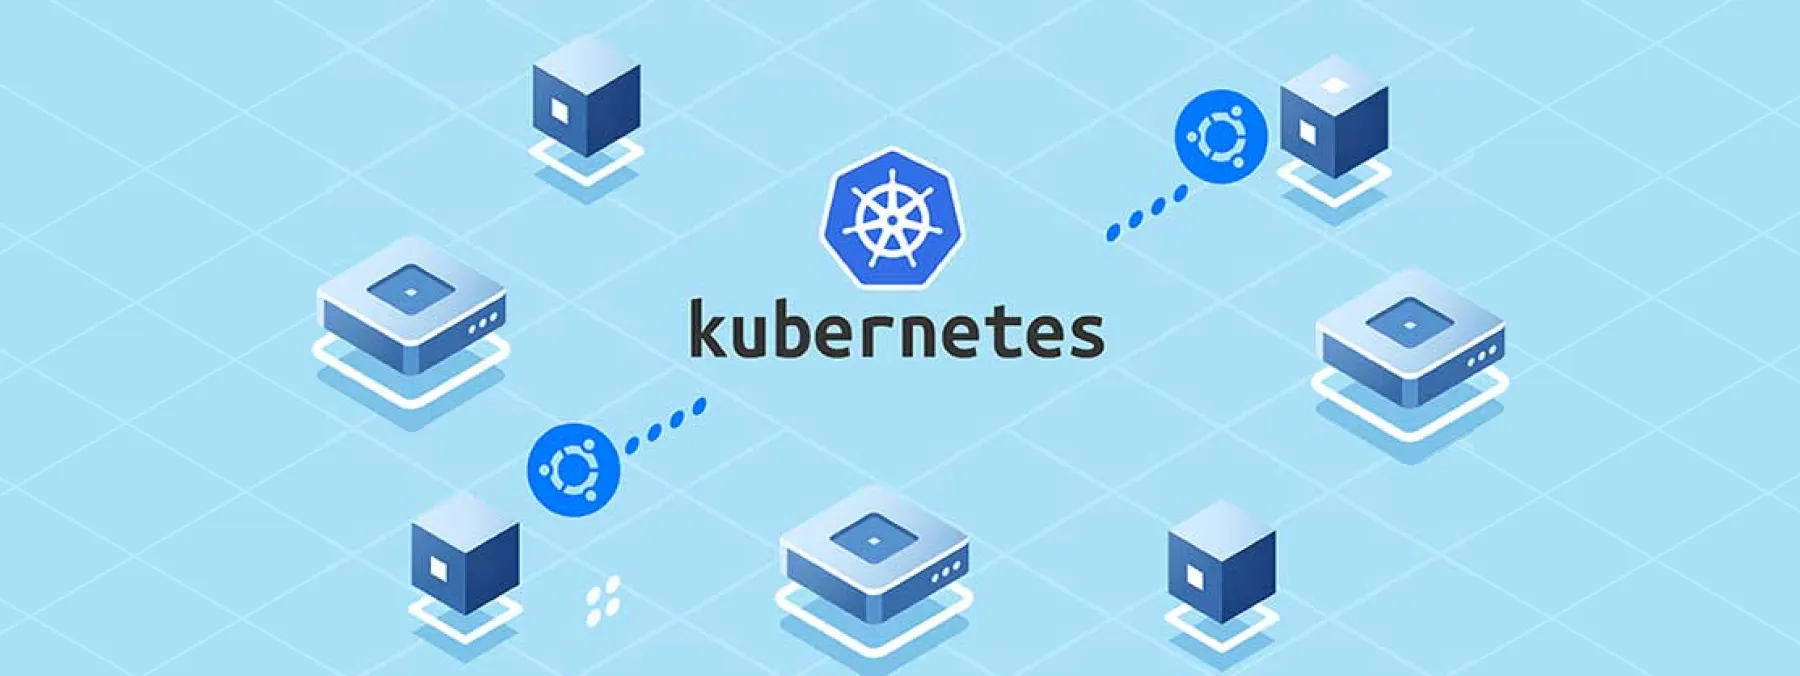 A guide to migrating to a cloud era: When and why to use Kubernetes 